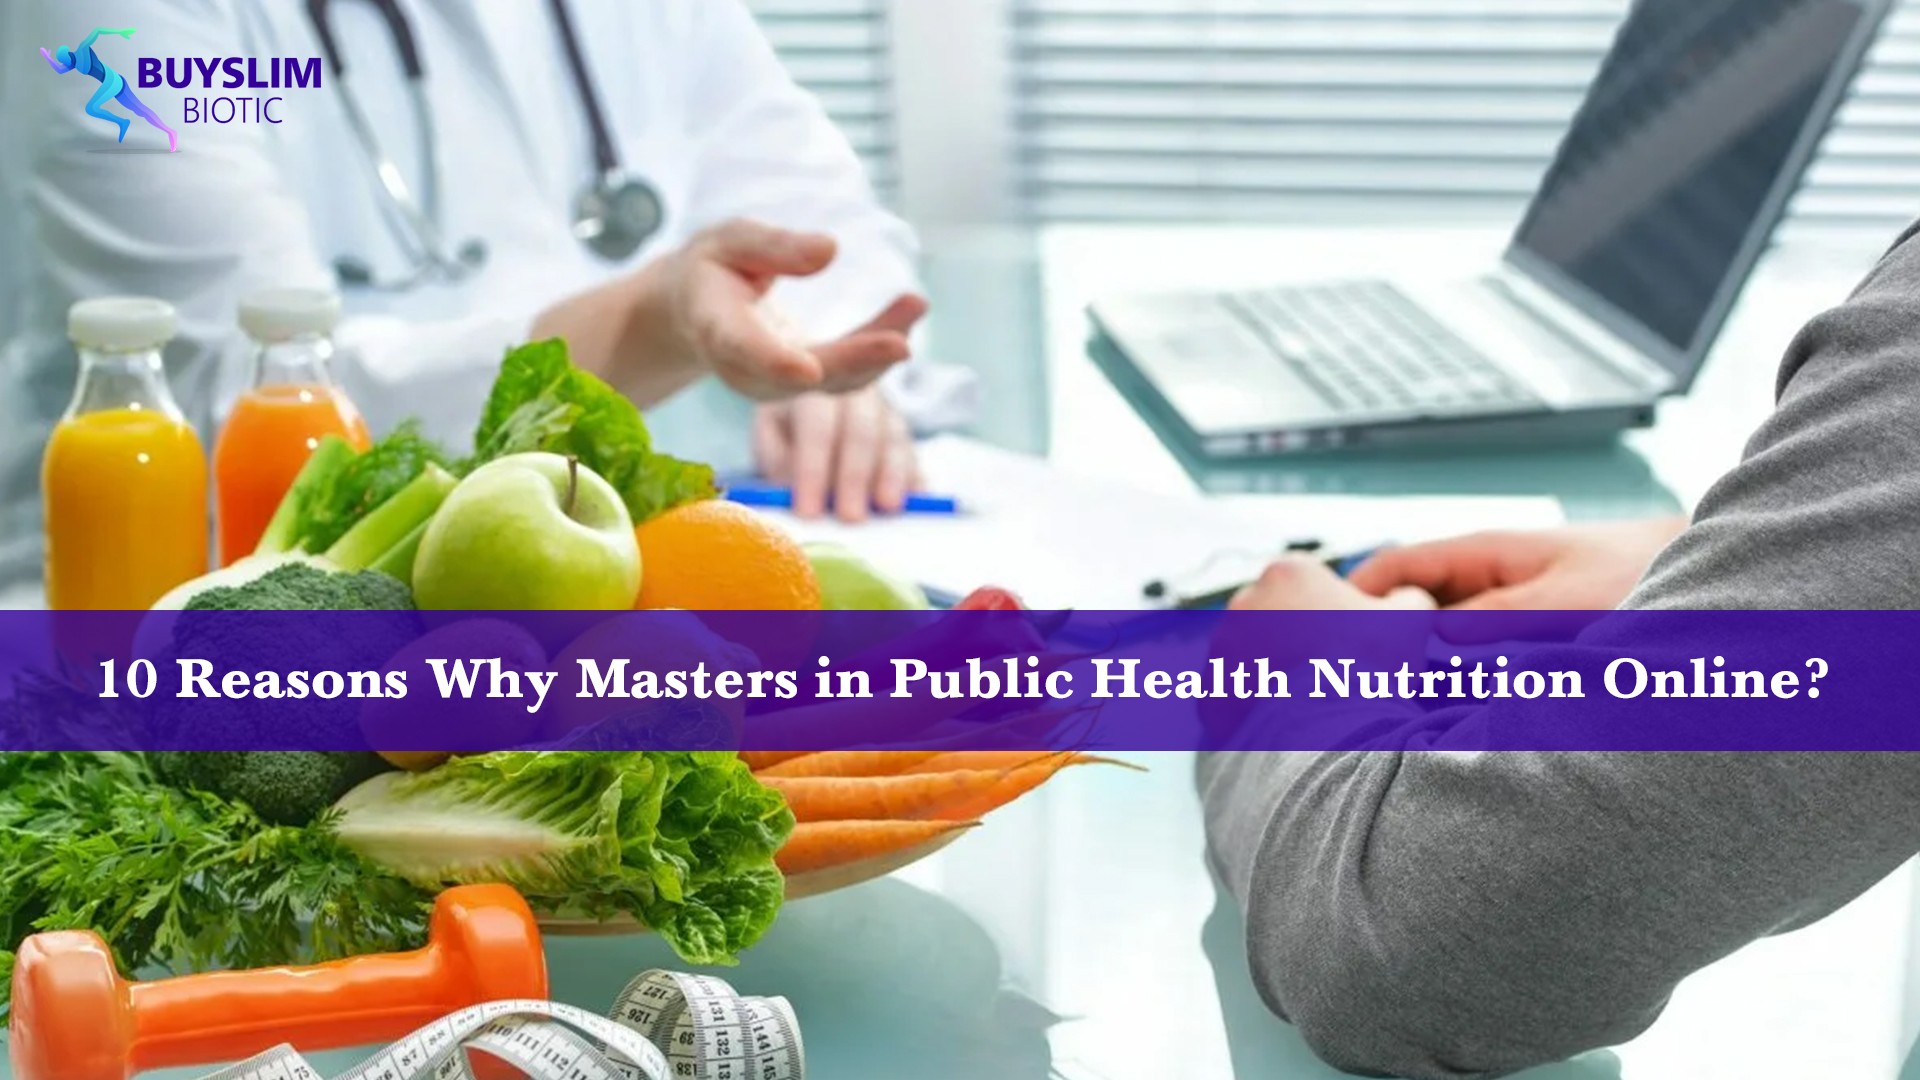 Masters in Public Health Nutrition Online